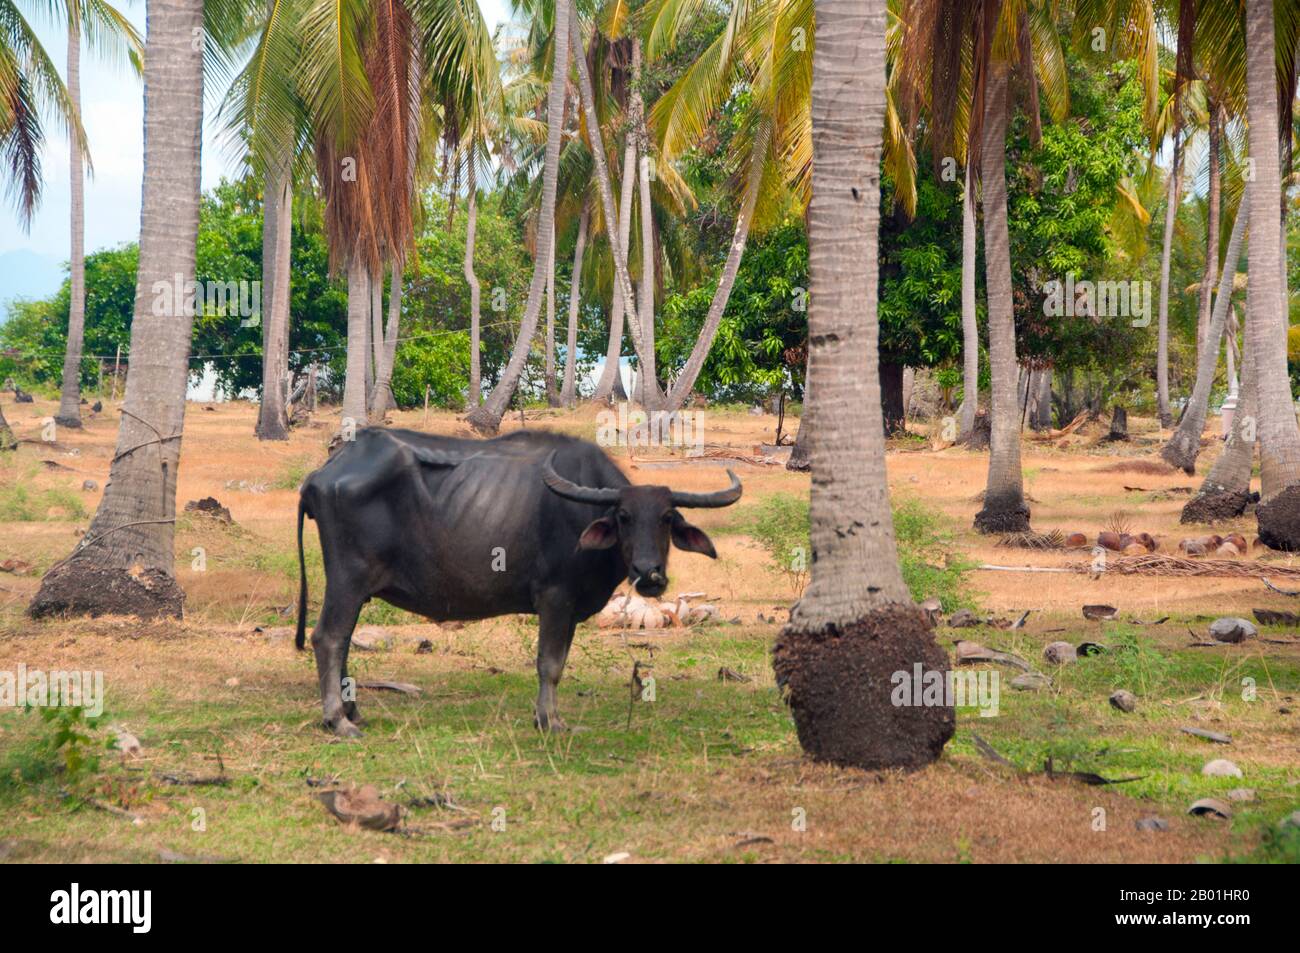 Thailand: Buffalo in coconut palm grove, Ko Sukorn, Trang Province.  Ko Sukorn is home to around 2,500 Thai Muslims, mainly fishing families, but also farmers growing coconuts, rice and rubber in the island’s fertile interior.  Trang province was dependent on tin mining until the first rubber seedlings were brought into Thailand around 1901 – part of a long journey from South America via the neighbouring Malay States.  Rubber, palm oil and fishing are the mainstays of the province's economy. Tourism is making an increasing impact as Trang’s Andaman Coast and islands are developed. Stock Photo